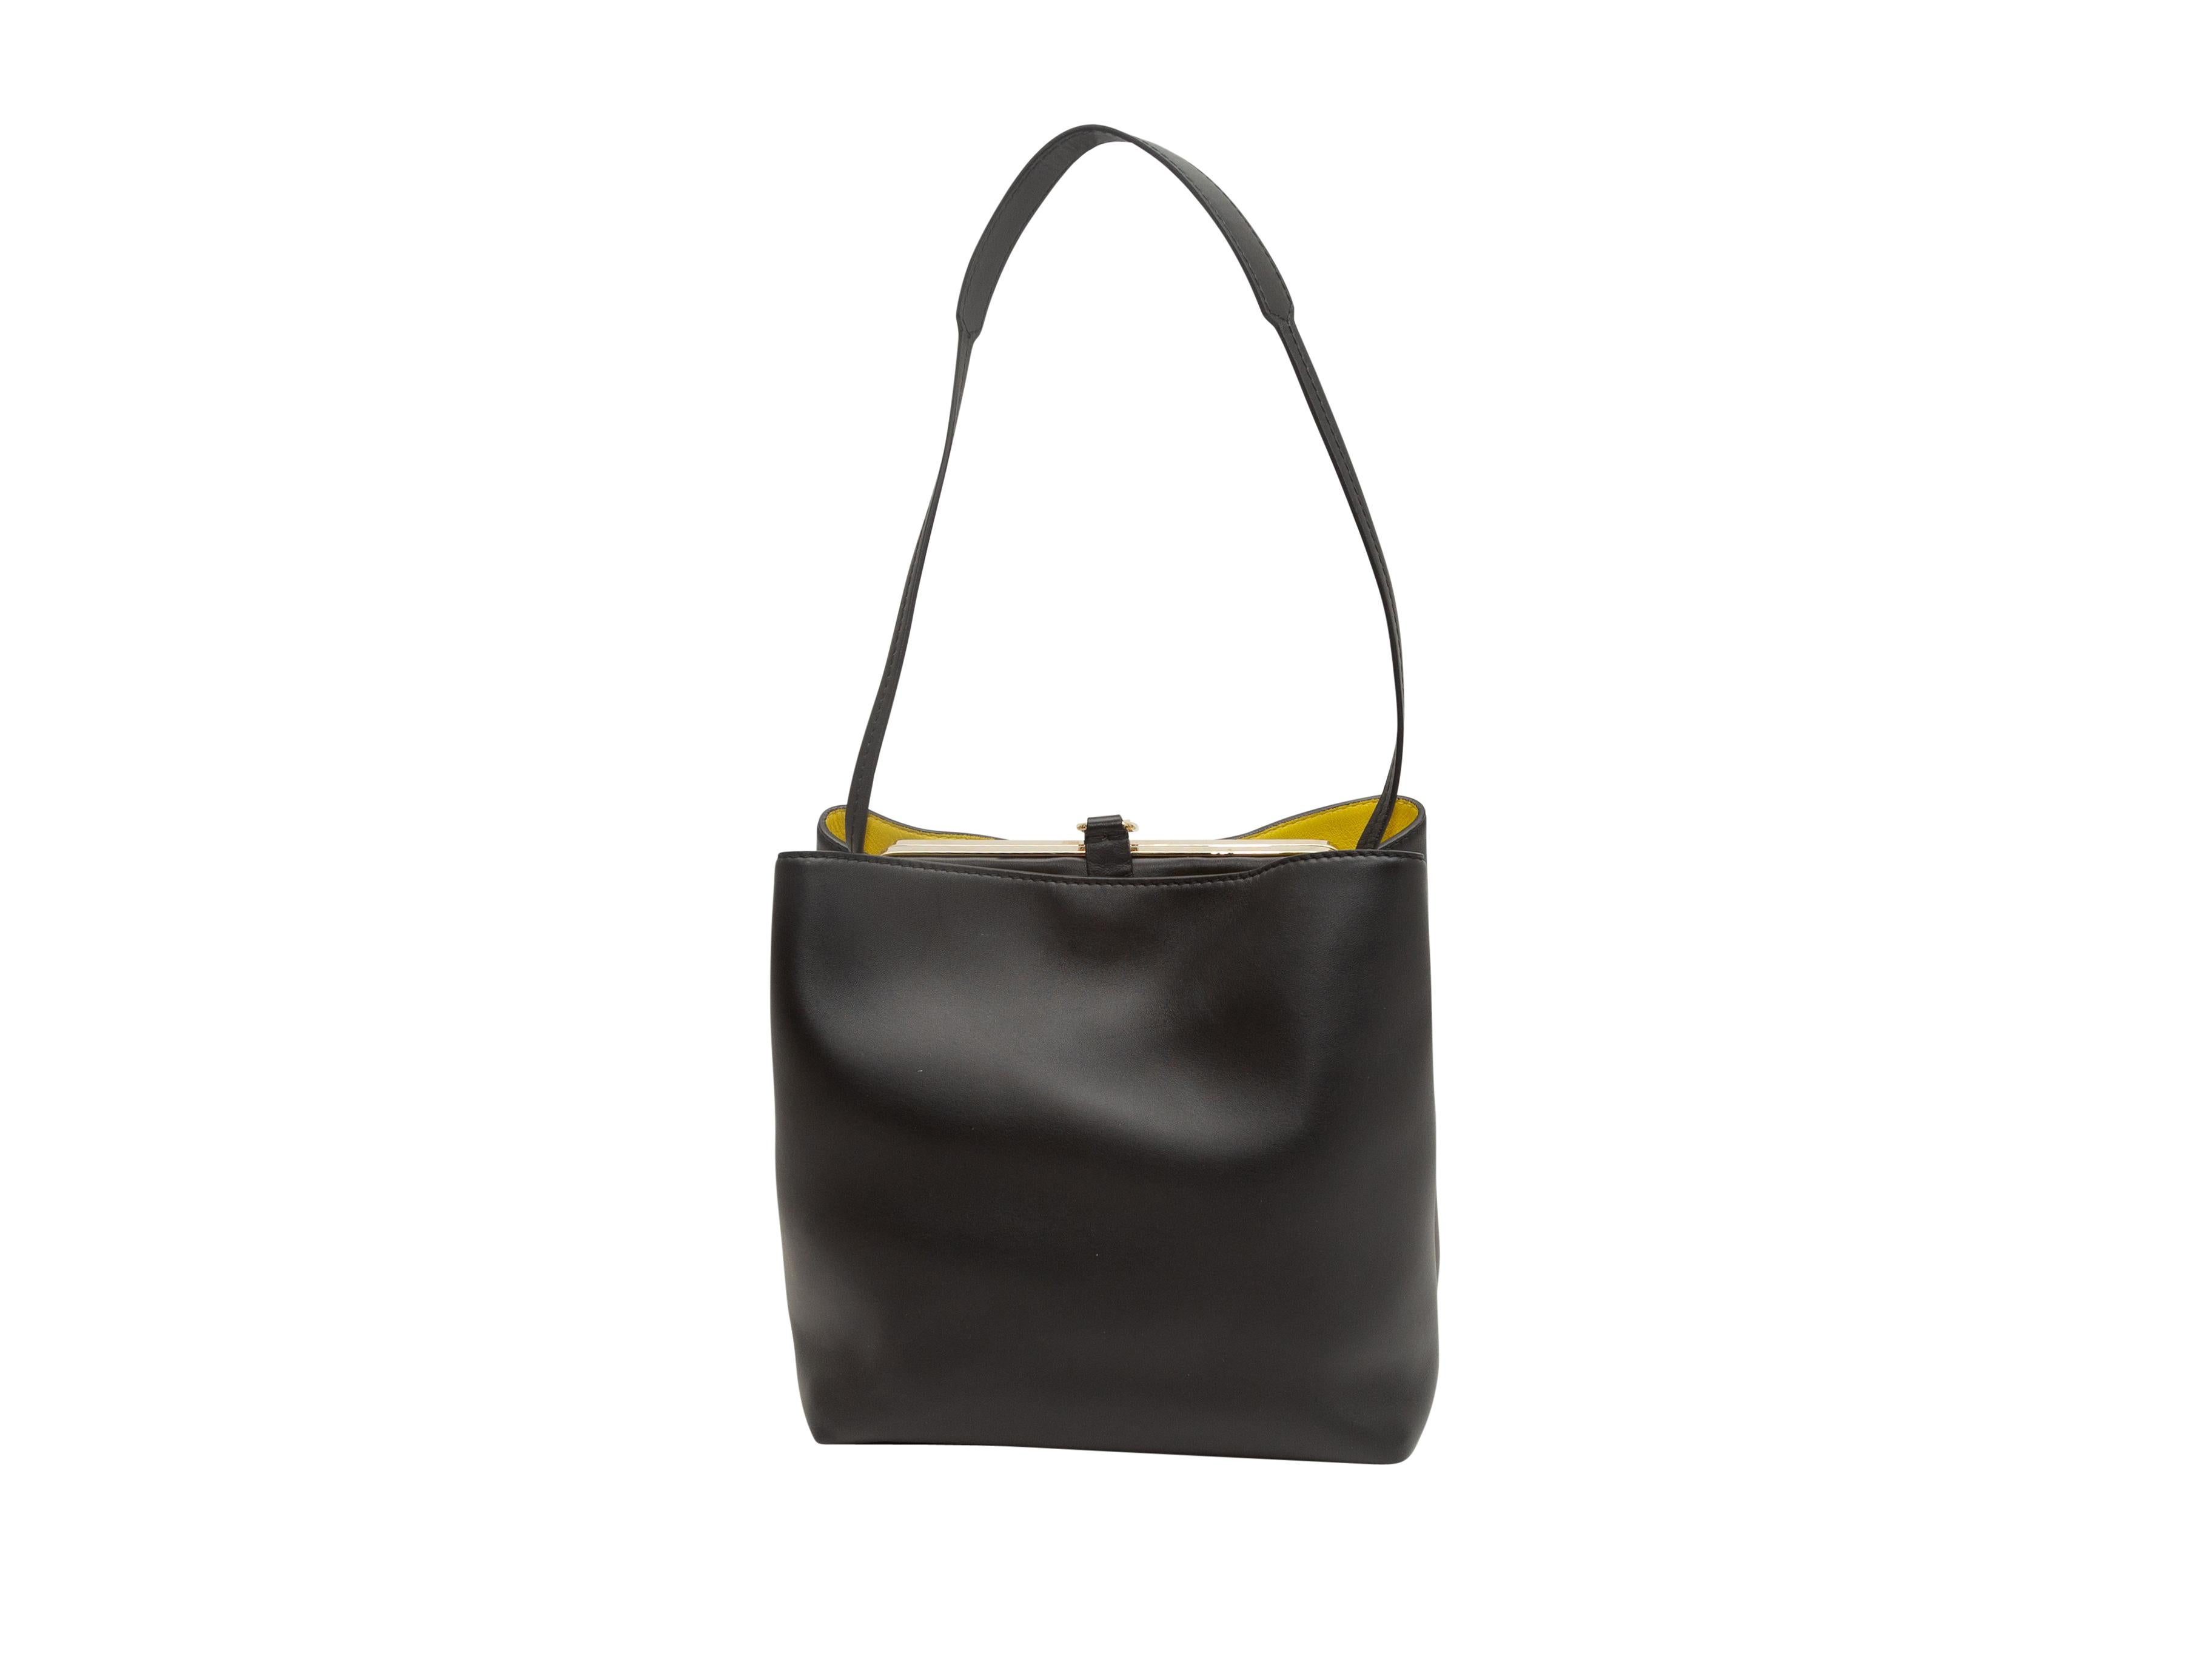 Product details: Black leather shoulder bag by Proenza Schouler. Gold-tone hardware. Yellow leather interior. 11.5